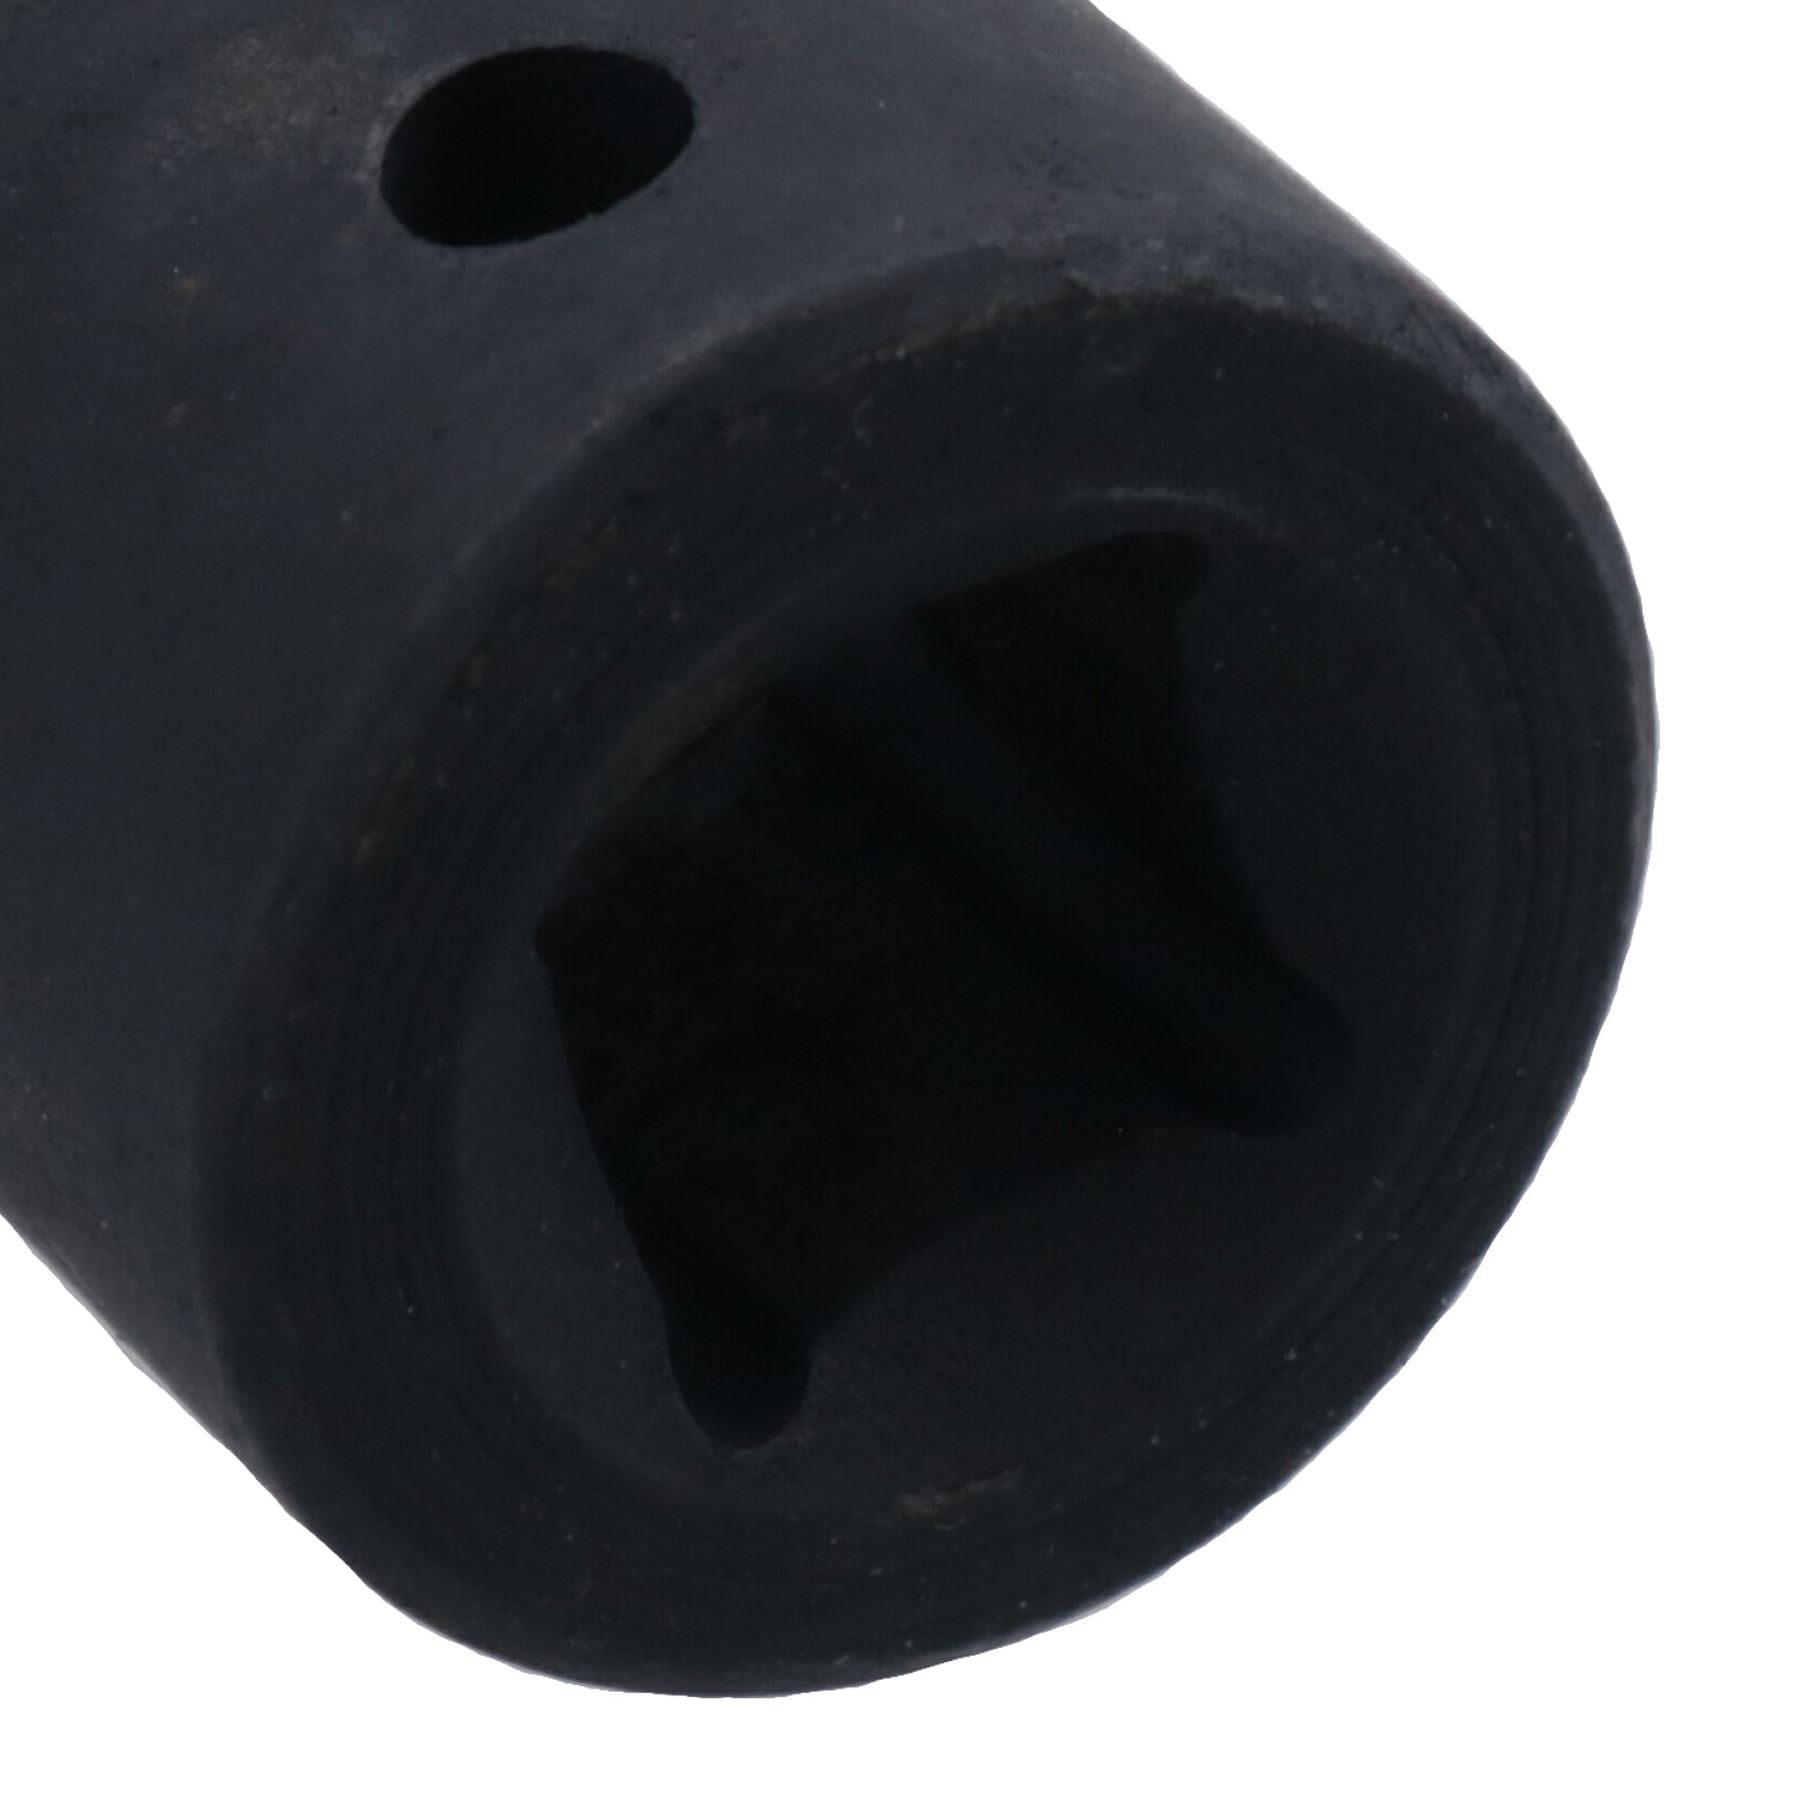 3/8in Drive Shallow Stubby Metric Impacted Impact Socket 6 Sided Single Hex